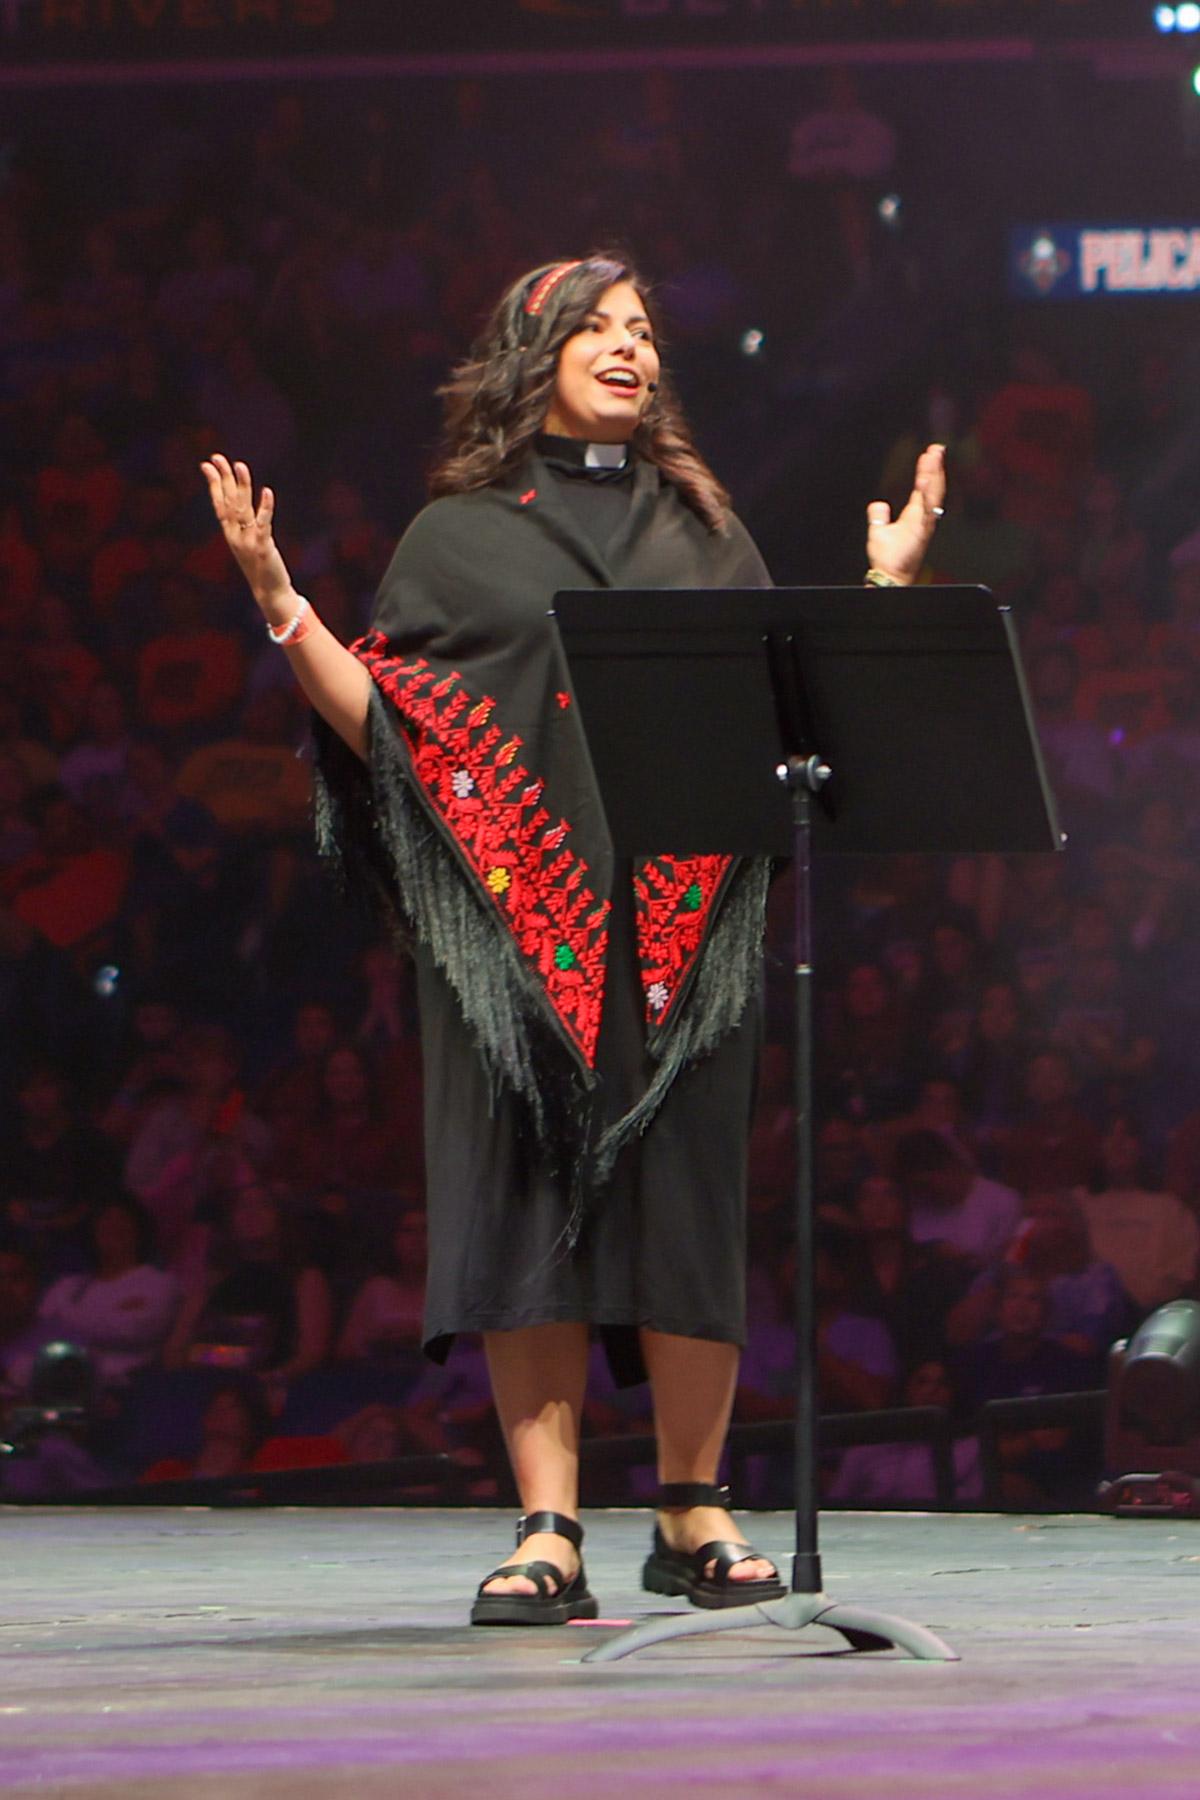 Rev. Sally Azar, a member of the LWF delegation, speaks about disrupting injustice at the ELCA Youth Gathering in New Orleans. Photo: ELCA/C. Jacobs